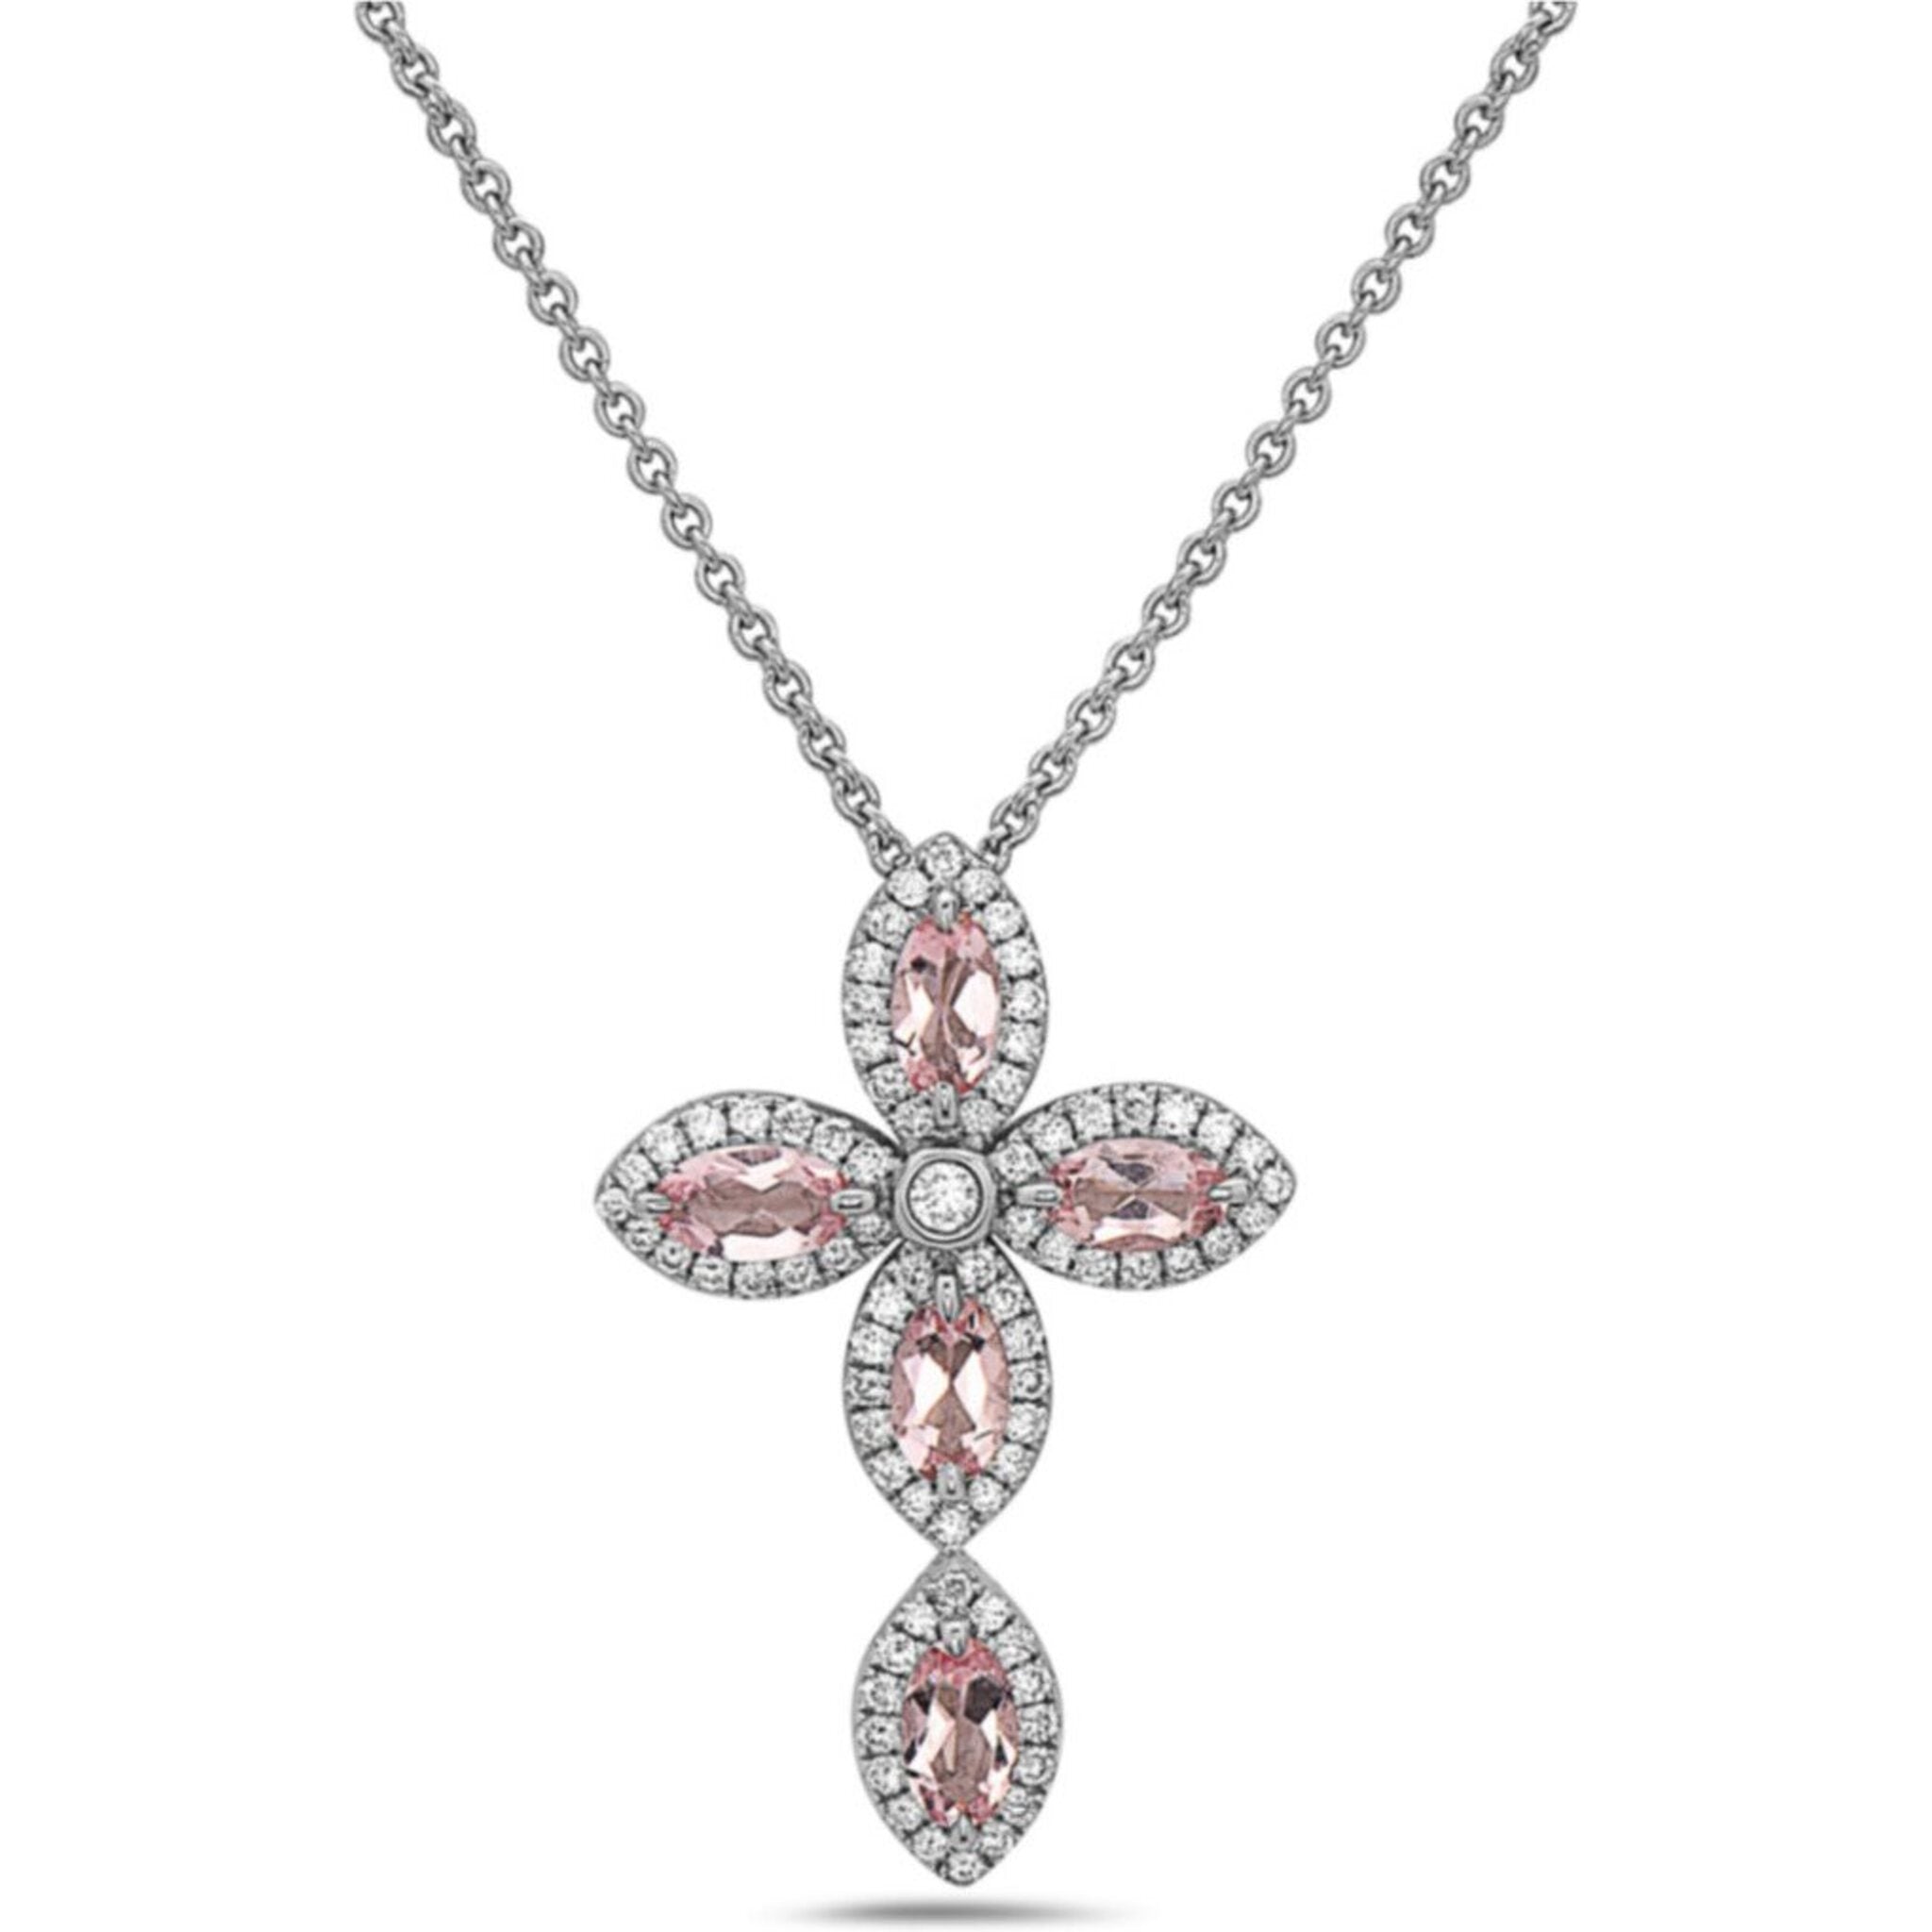 Charles Krypell - Pastel Diamond Firefly Marquise Cross Necklace - Morganite